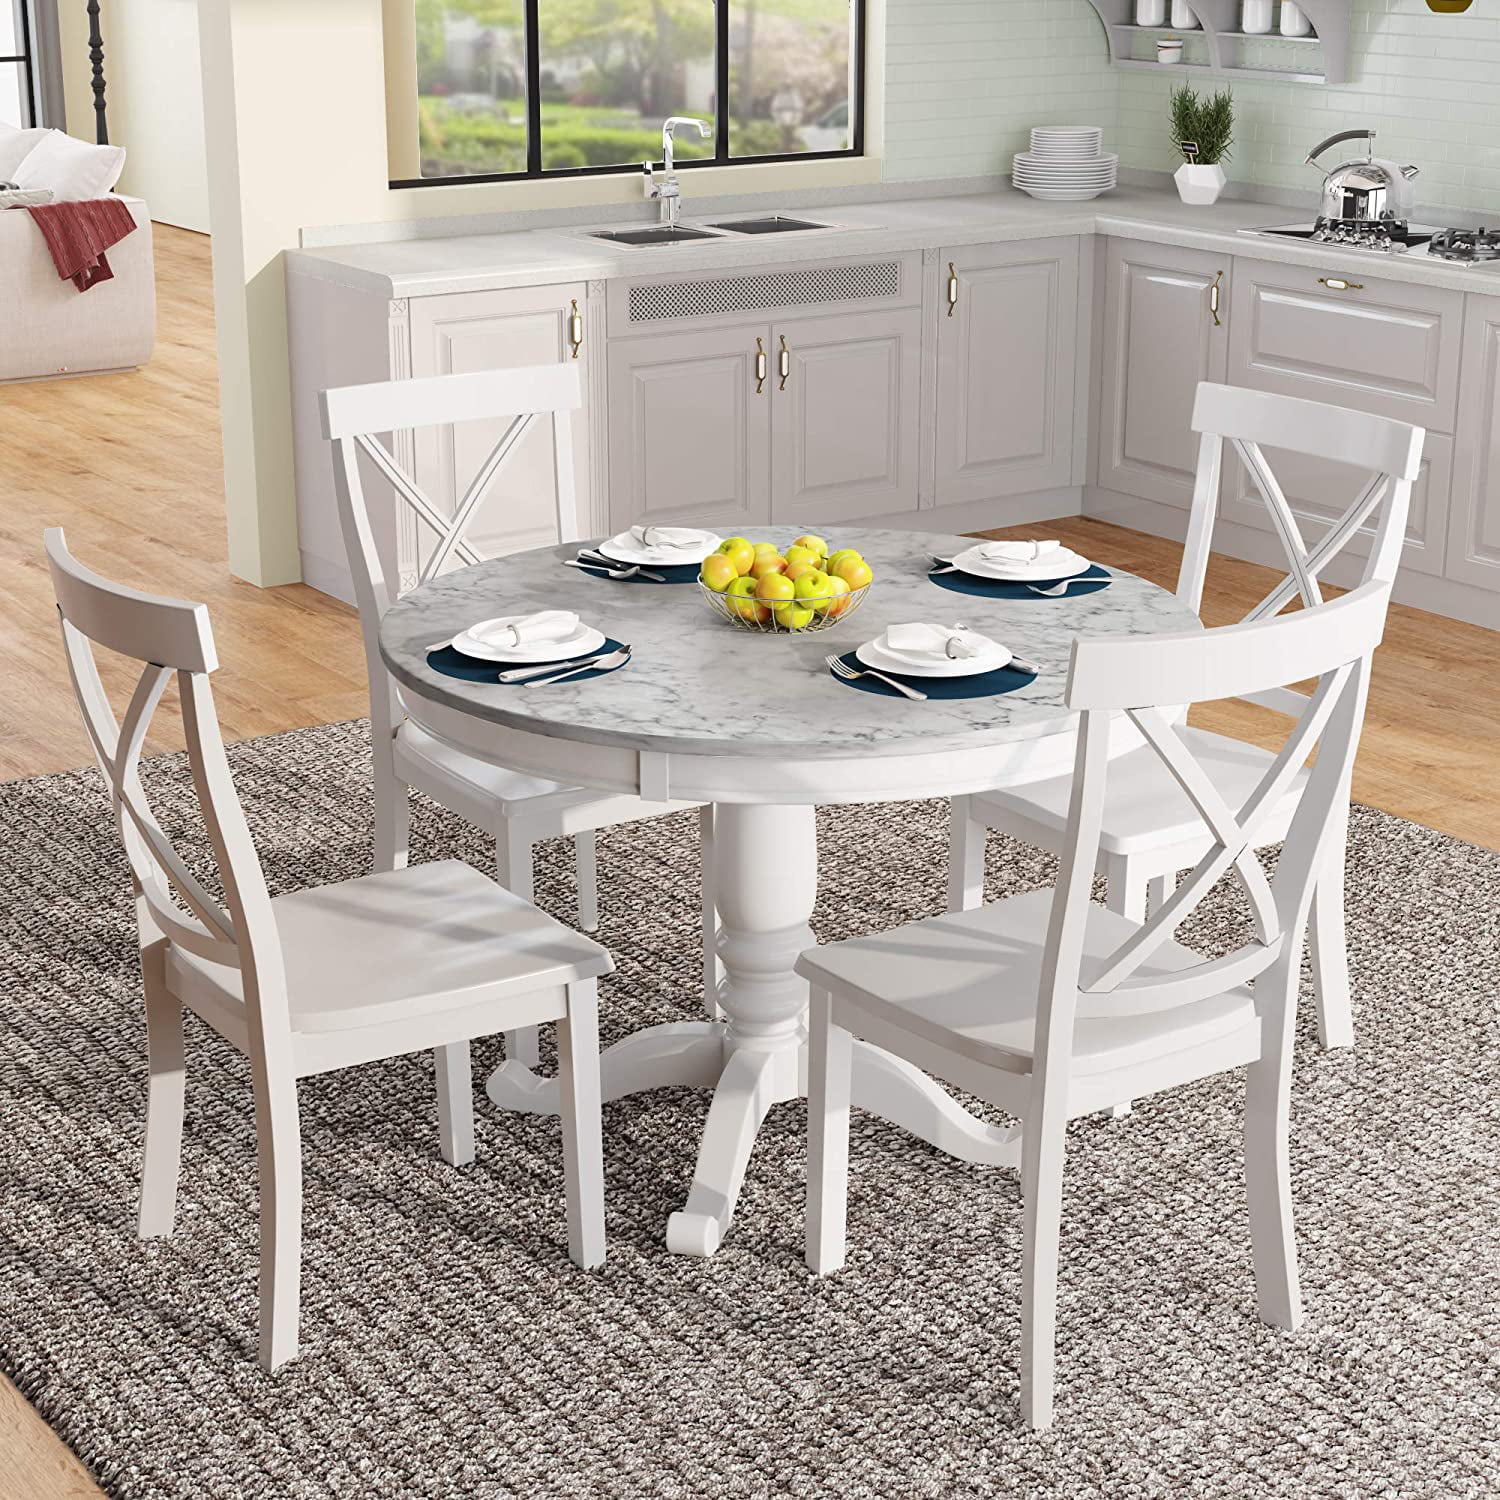 5 Piece Dining Set Wood Round Kitchen, Small Round Dining Table Set For 4